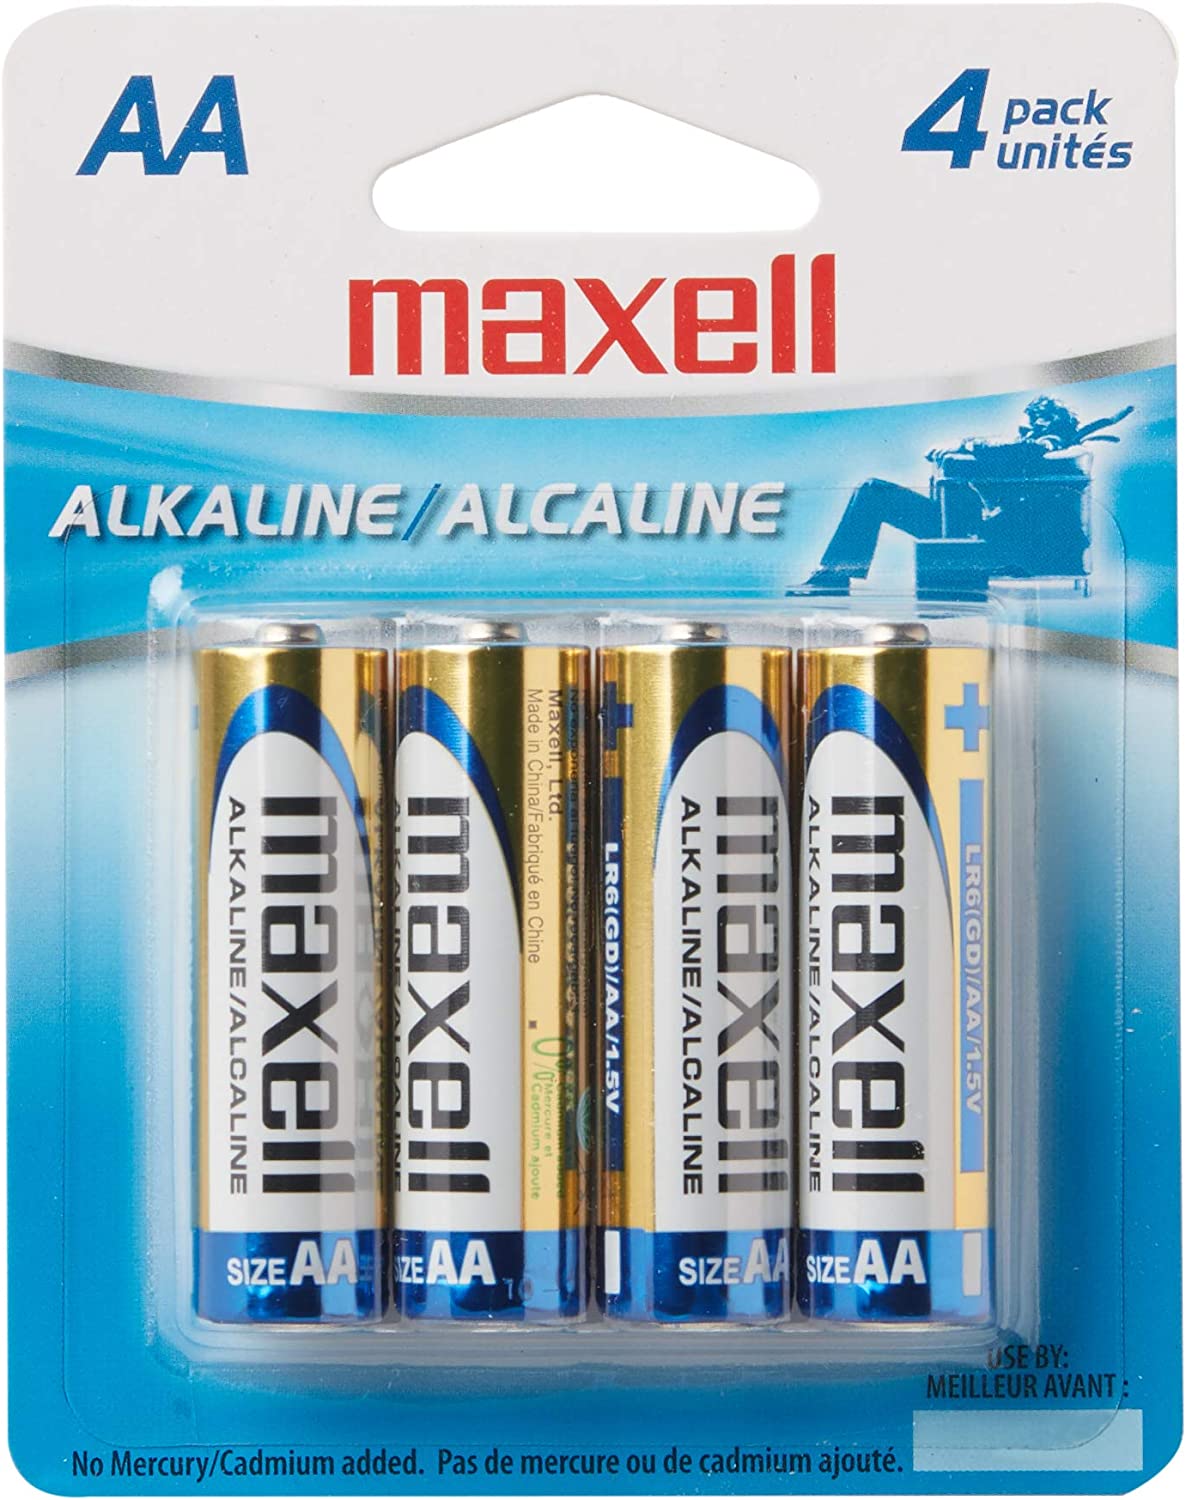 Maxell 723465 Ready-to-go Long Lasting and Reliable Alkaline AA Battery 4-pk